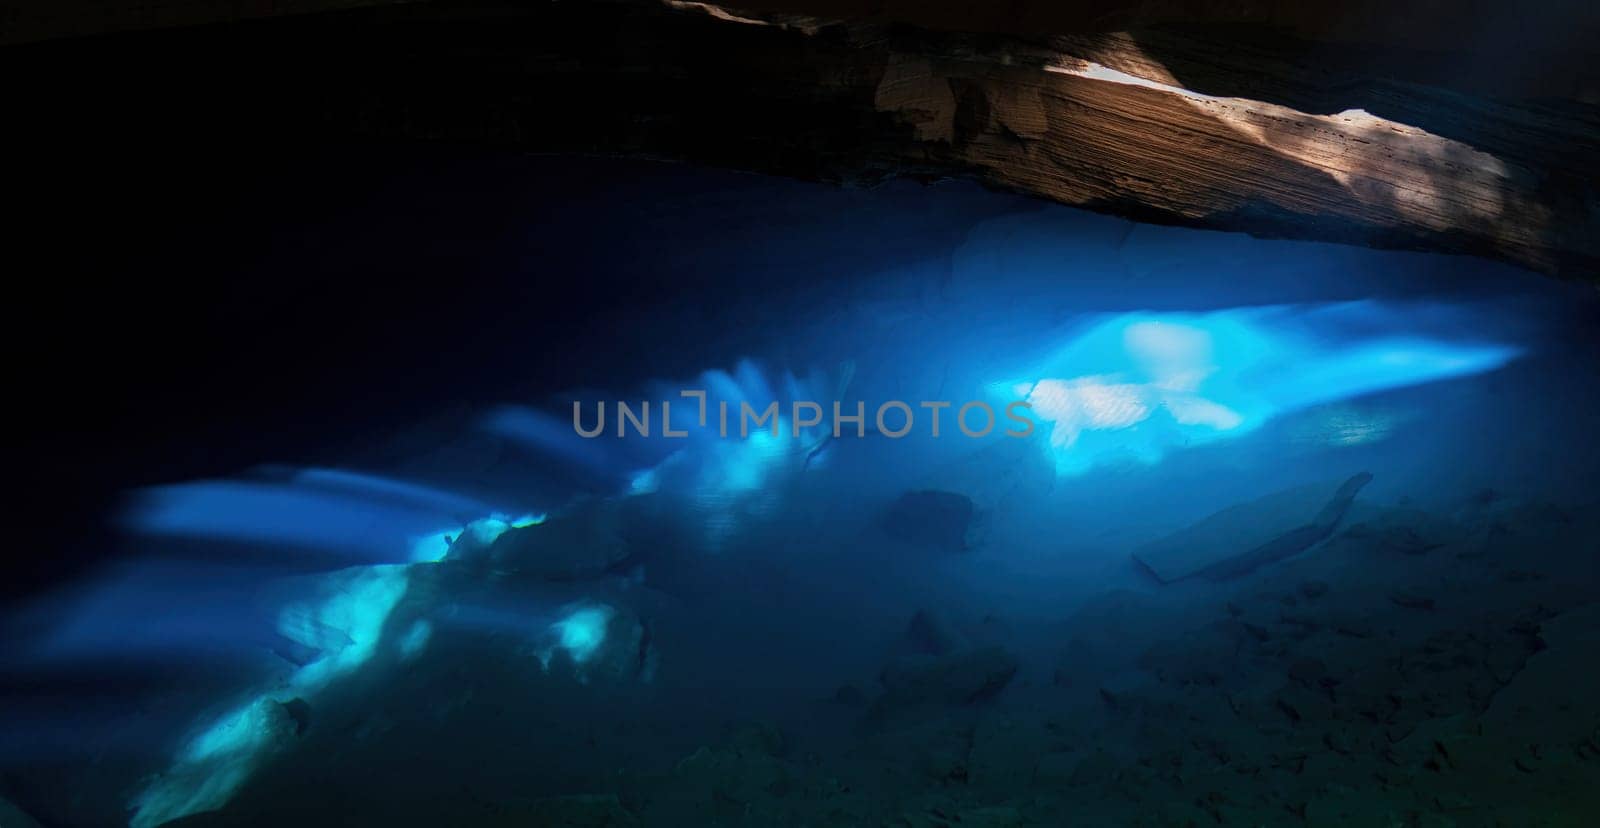 A serene underwater cave is illuminated by blue light, casting a magical glow and creating a tranquil atmosphere.